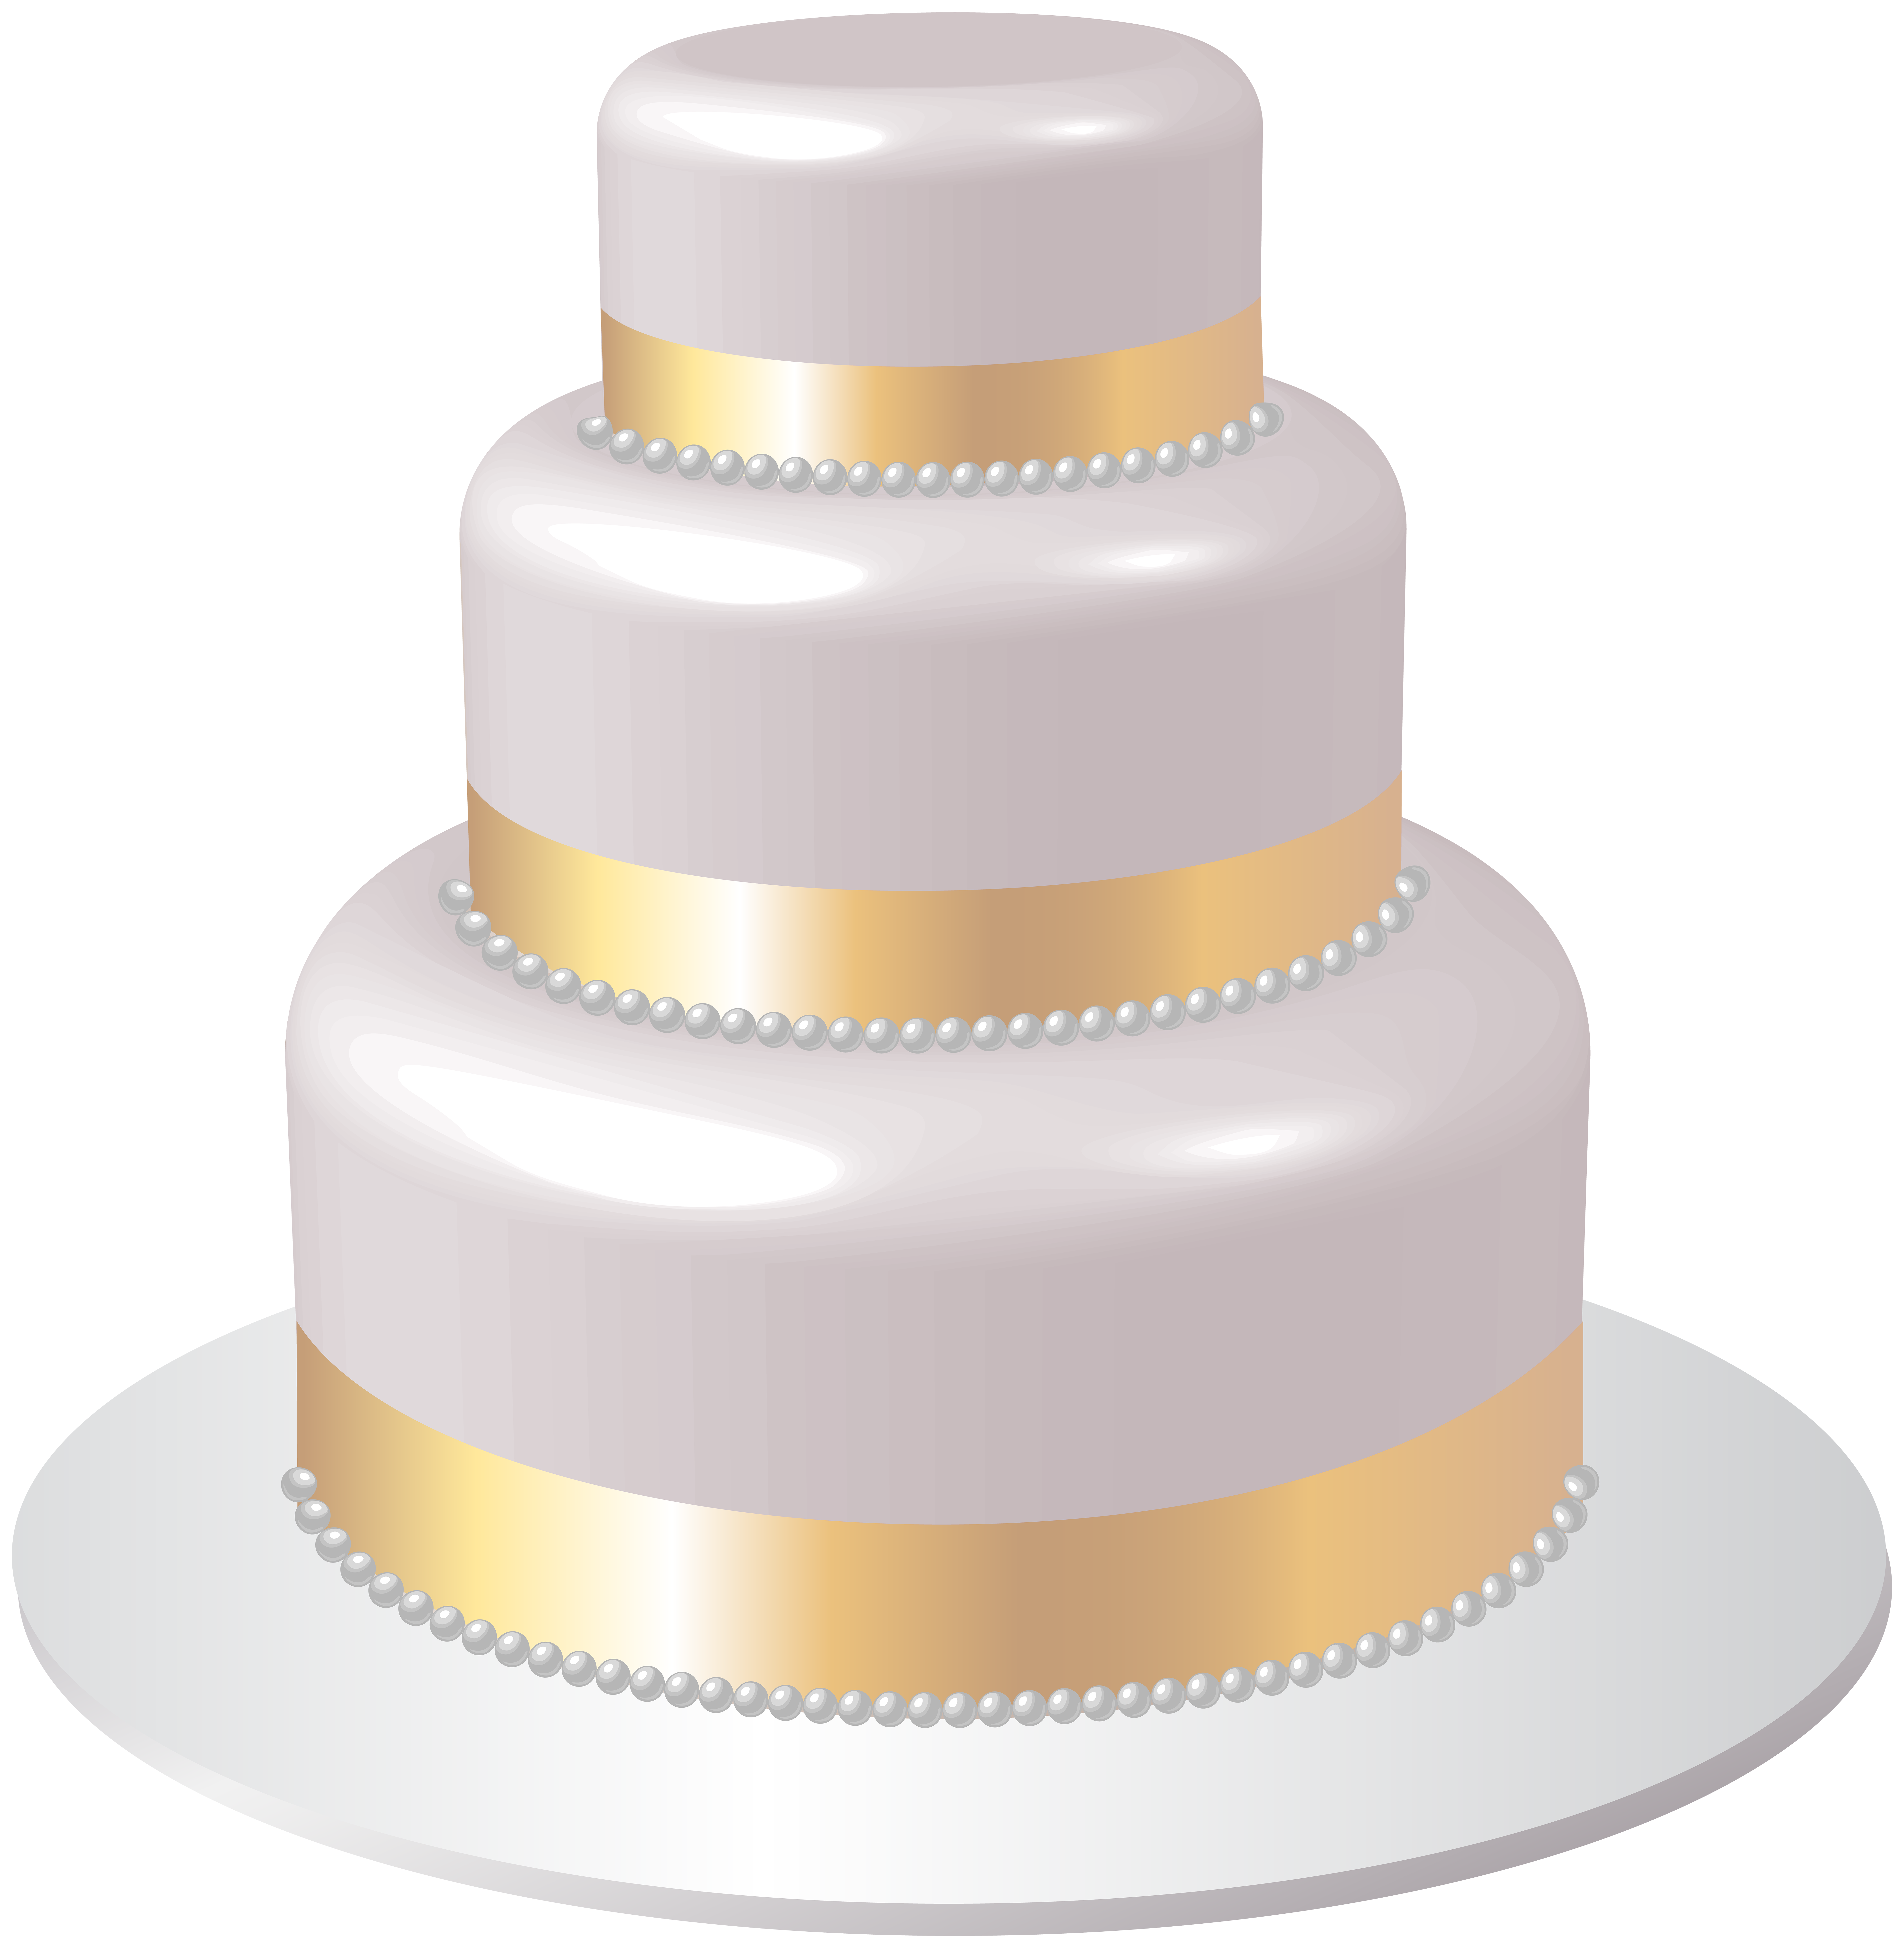 Cake PNG, Cake Transparent Background - FreeIconsPNG